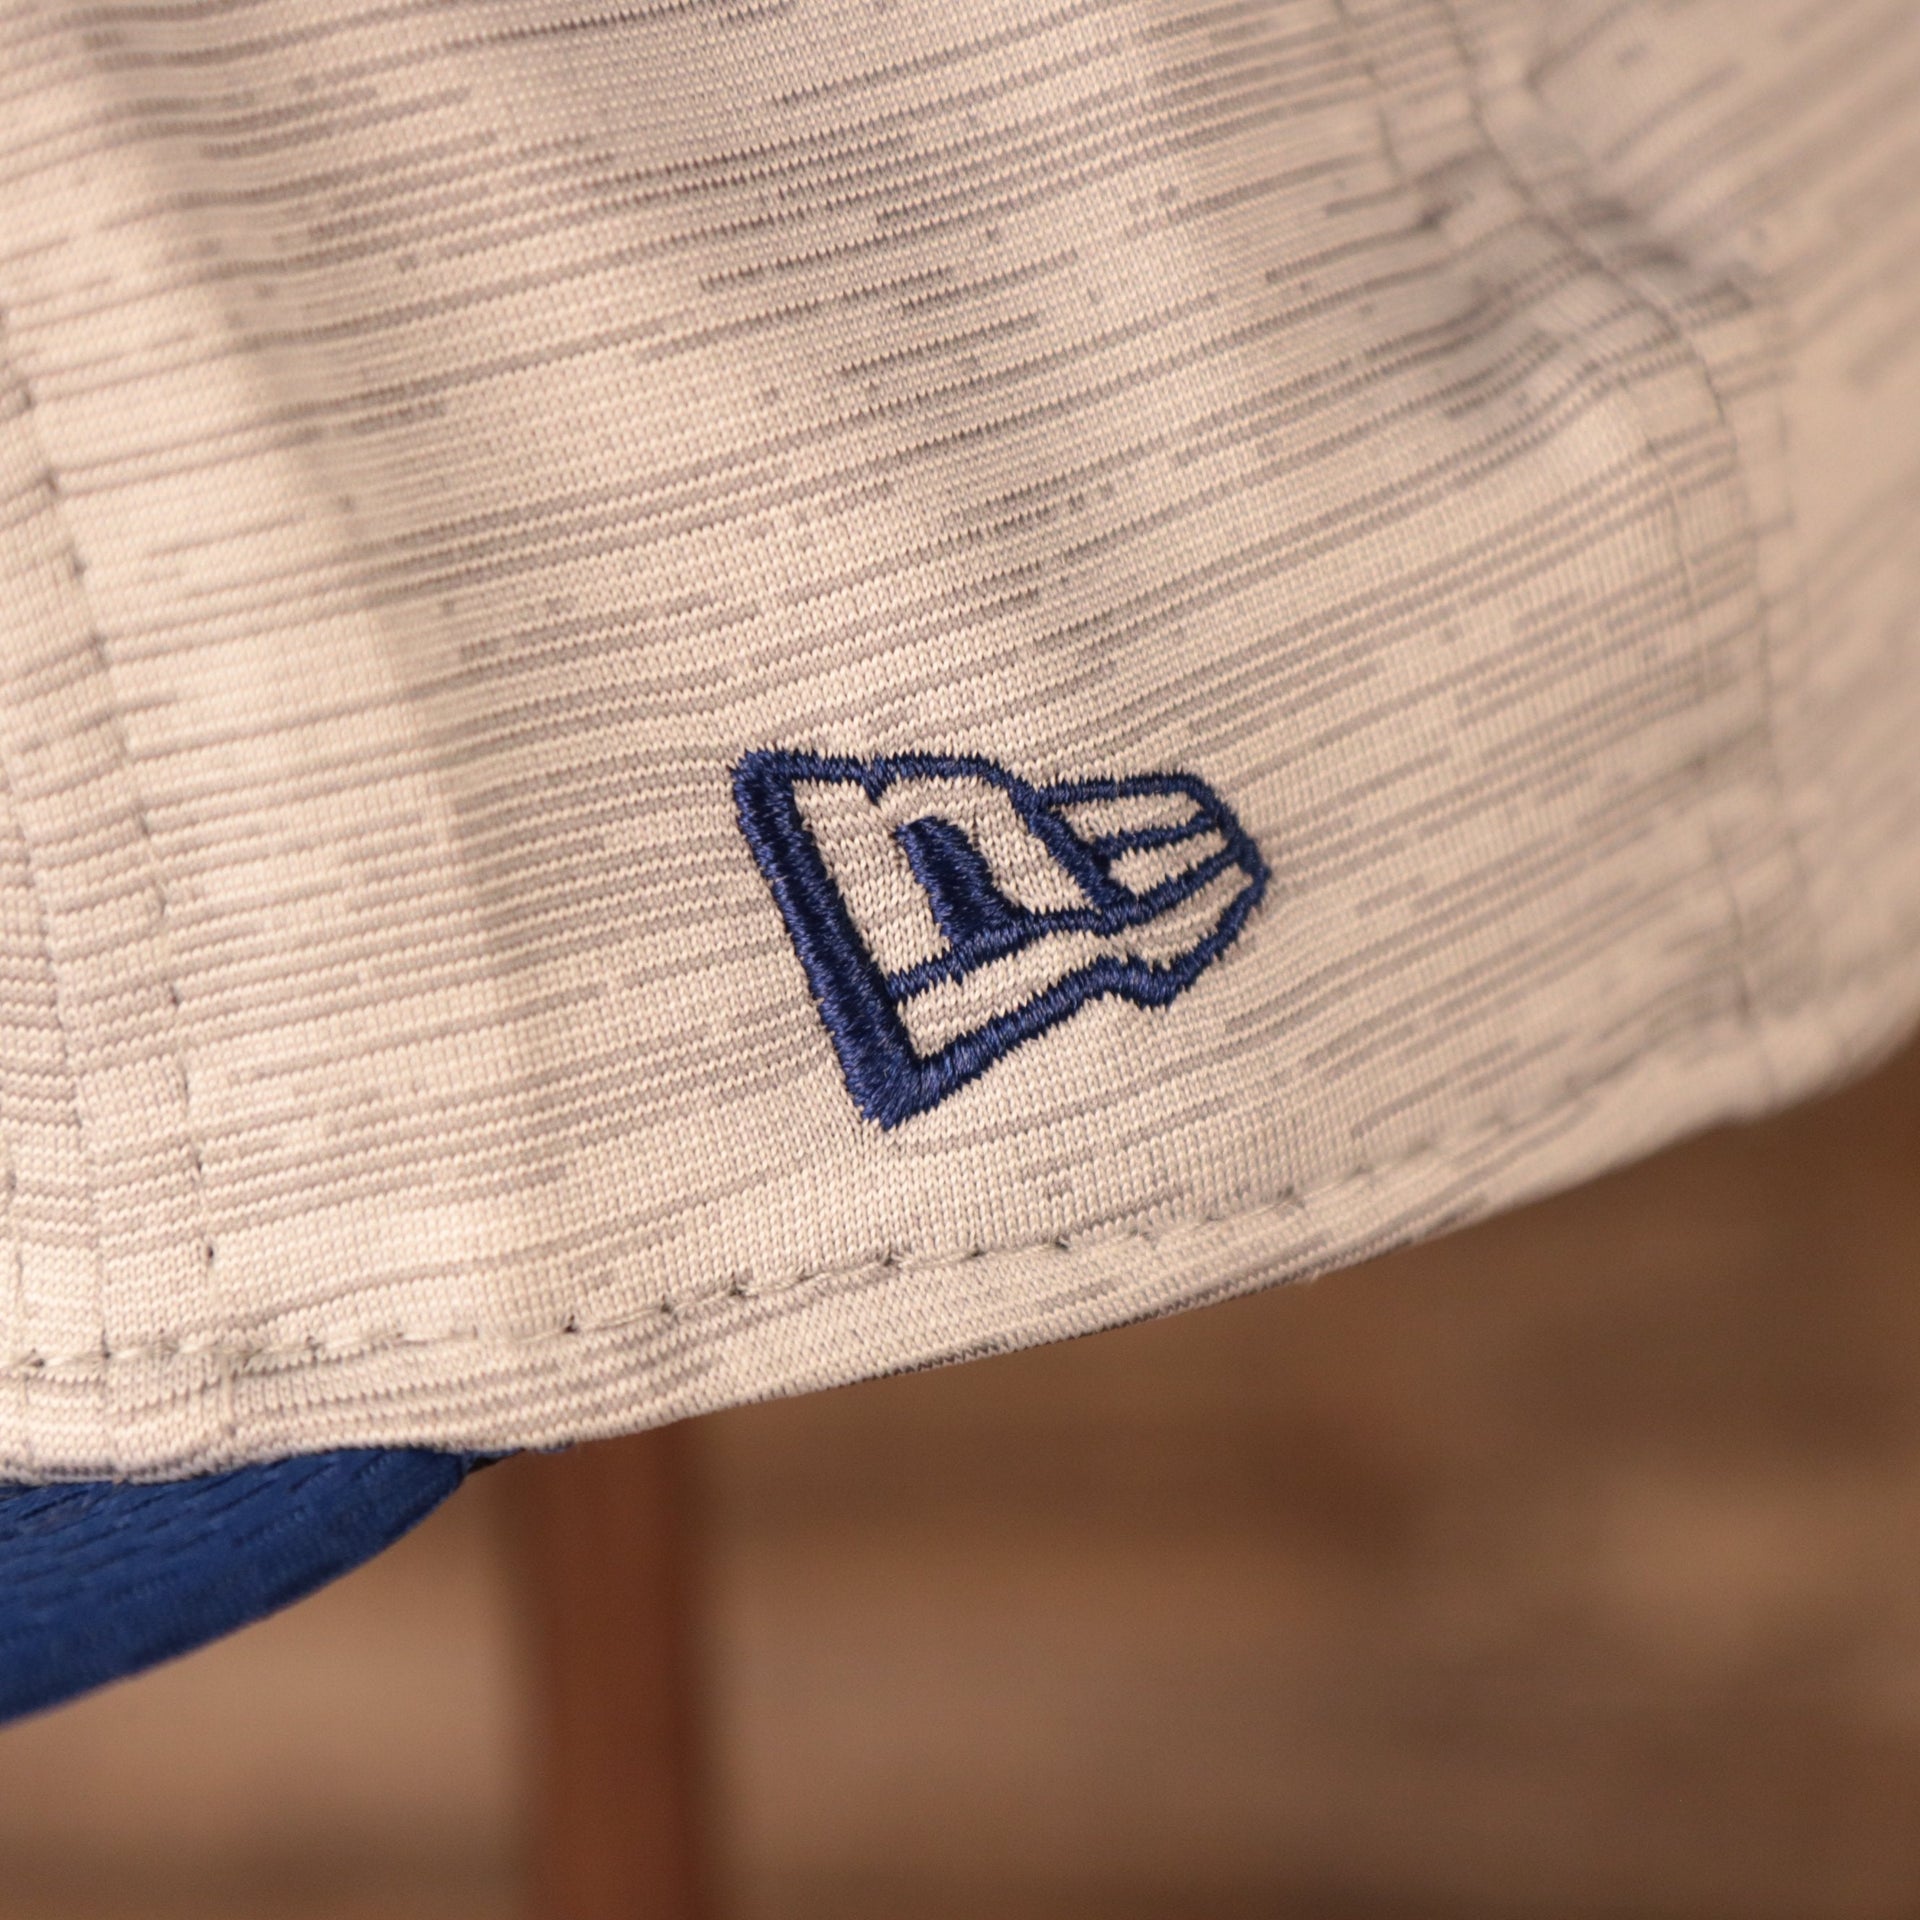 A closeup shot of the New Era royal blue patch on the side of the 2021 nfl on field snapback hat.